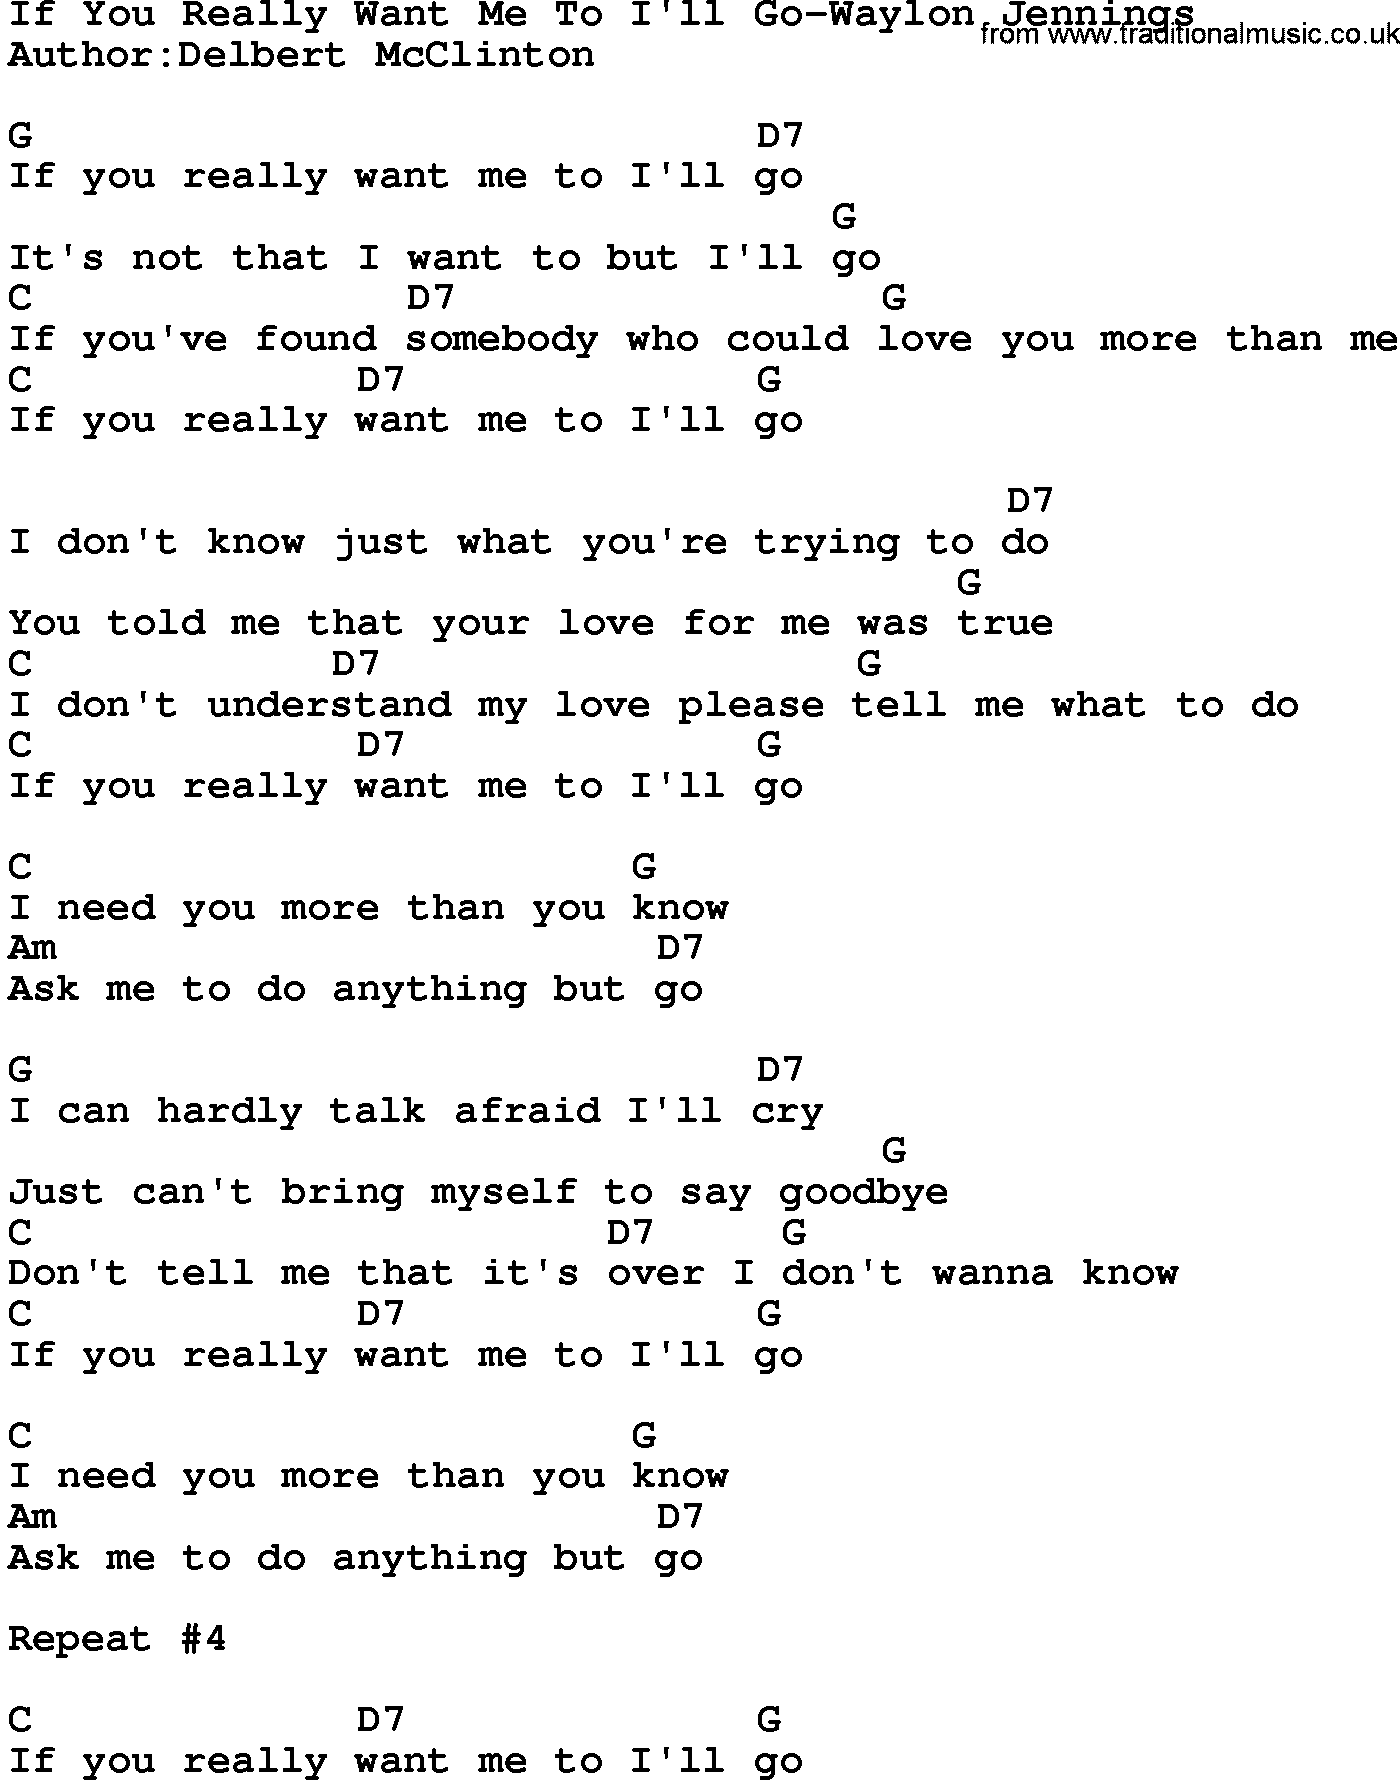 Country music song: If You Really Want Me To I'll Go-Waylon Jennings lyrics and chords